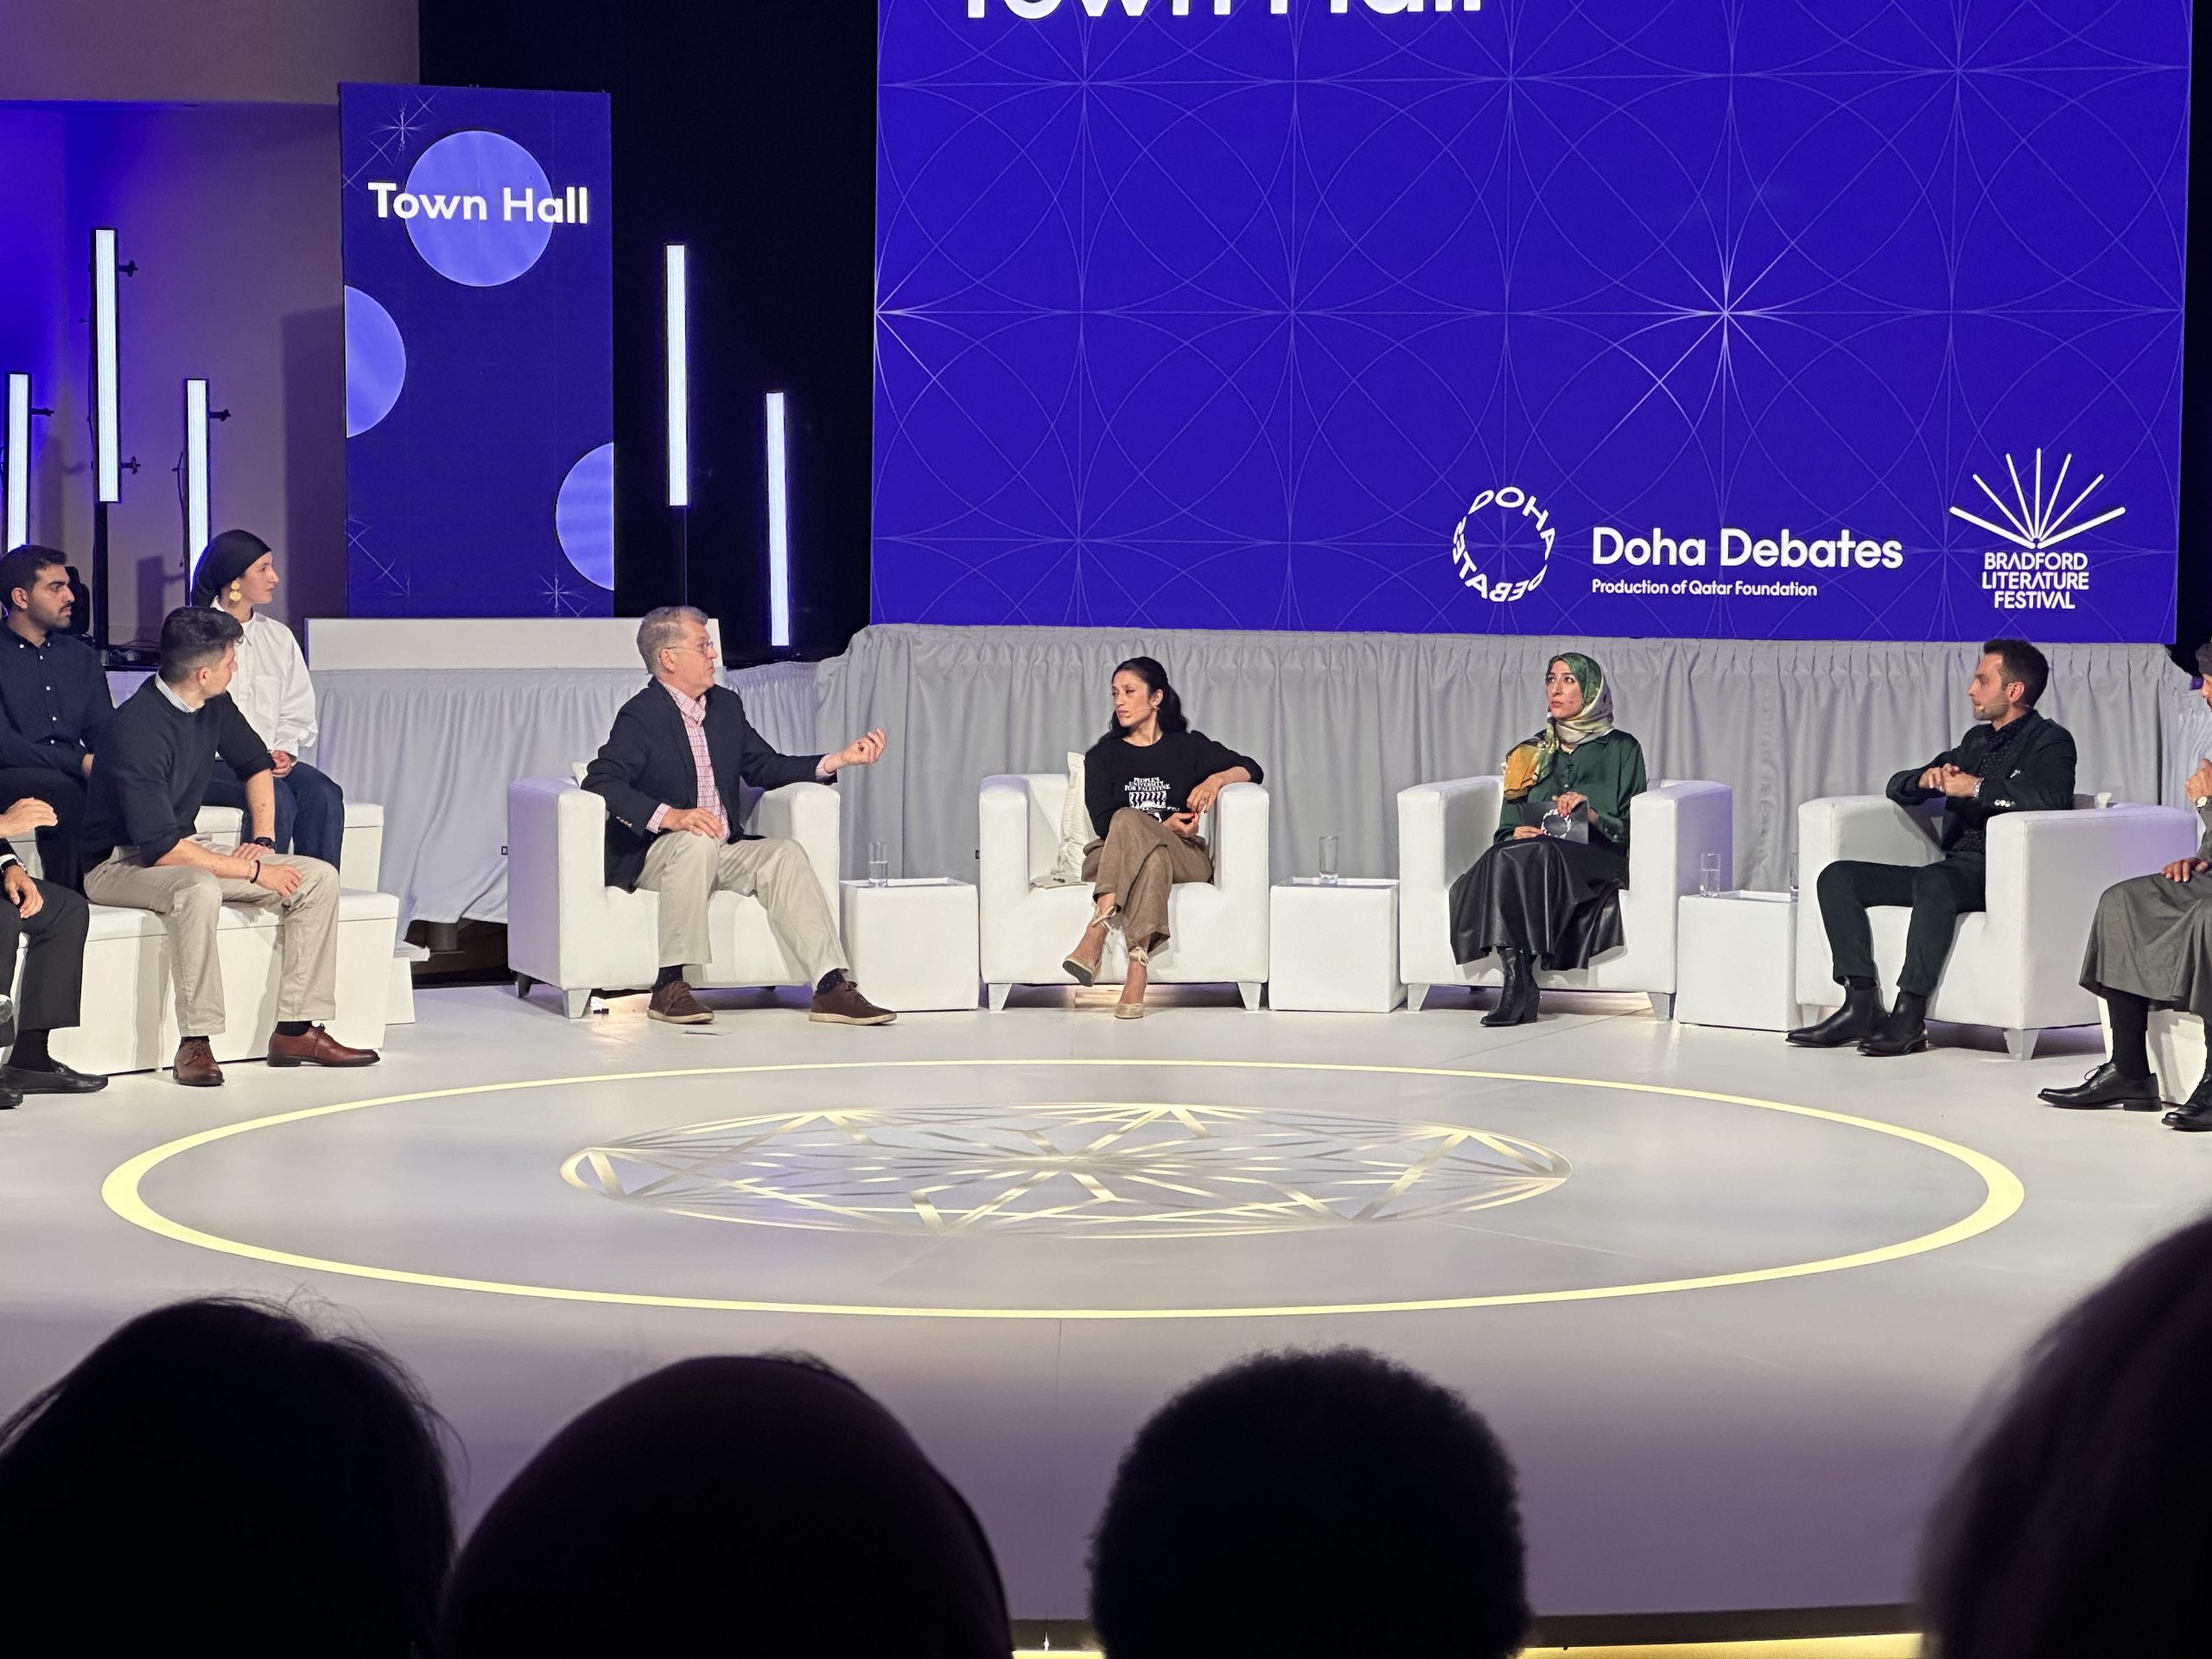 Doha Debates platform extends global outreach with first UK Town Hall event